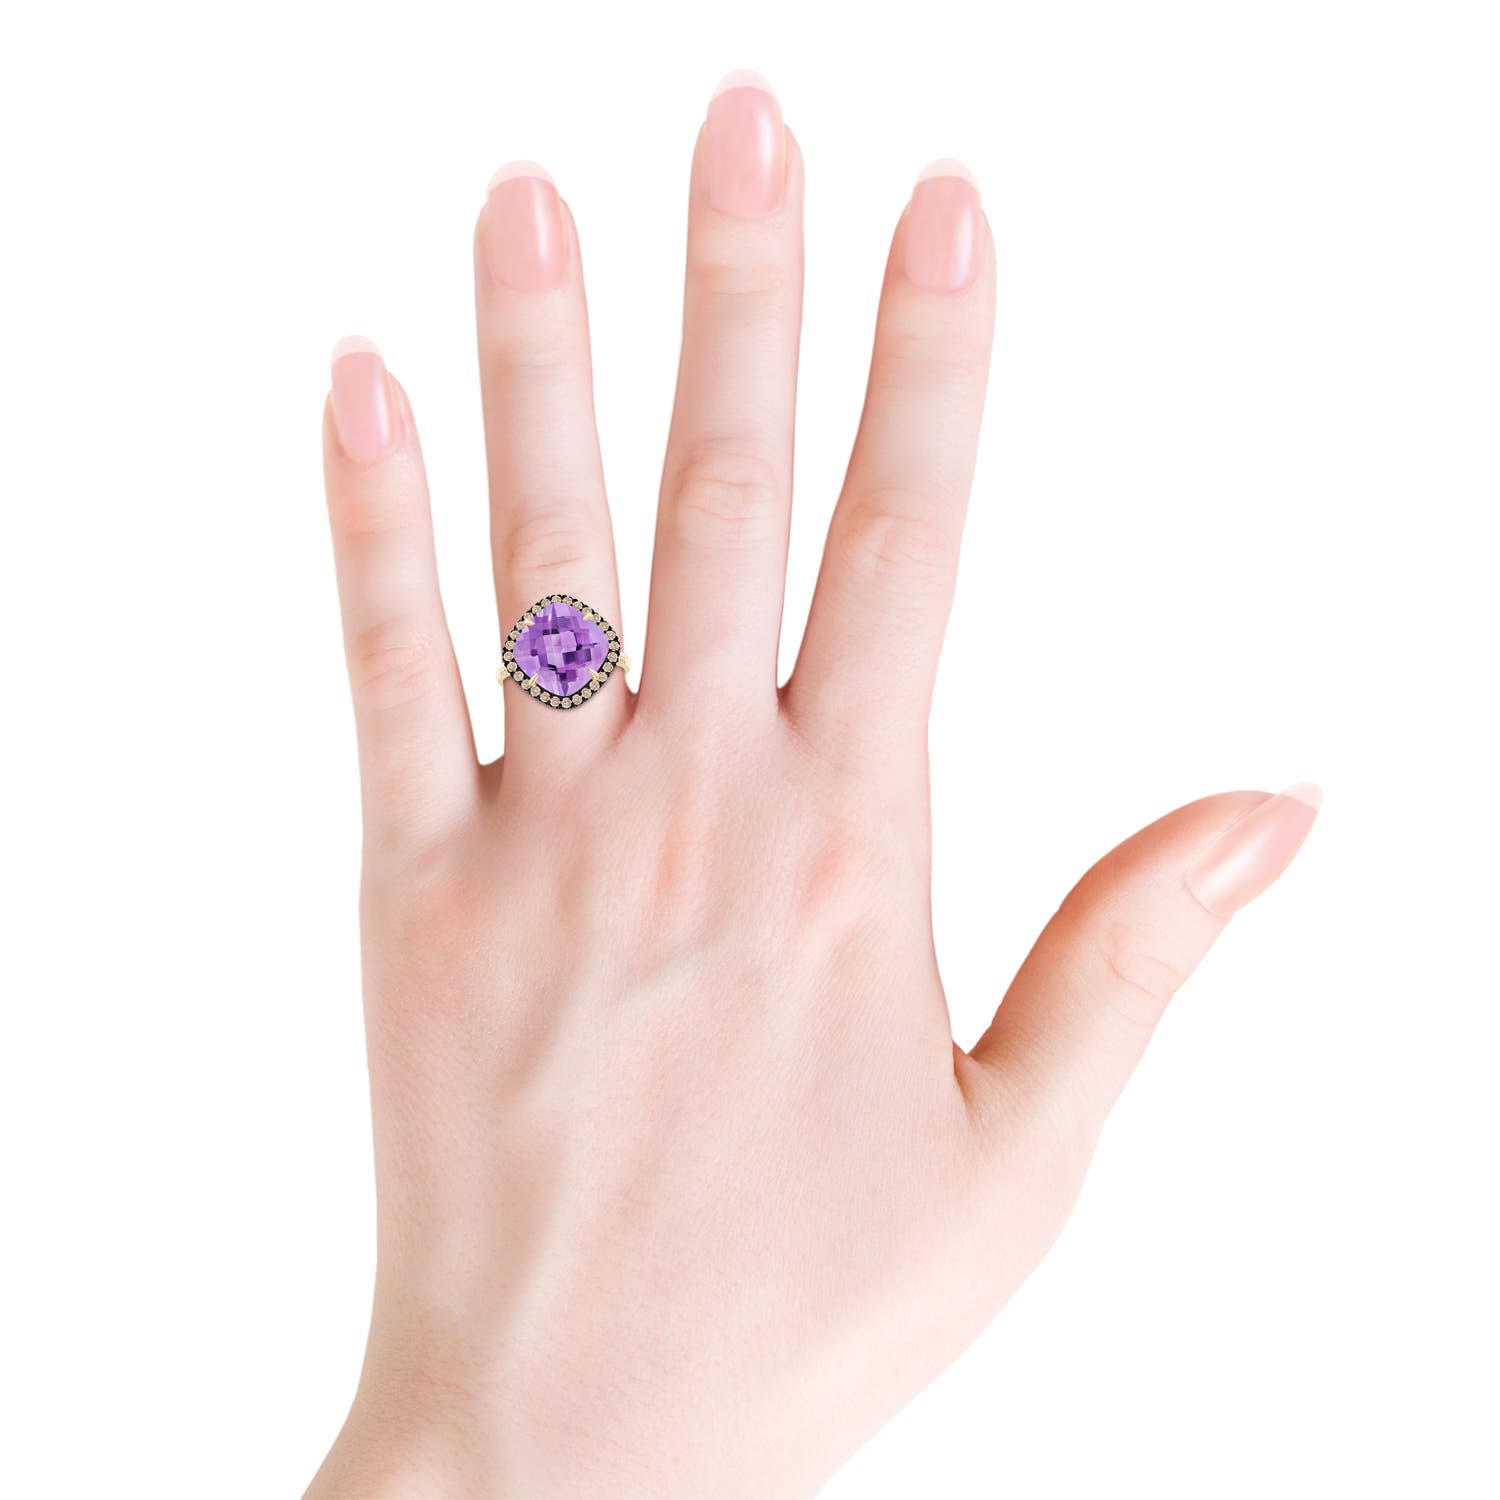 A - Amethyst / 4.98 CT / 14 KT Yellow Gold